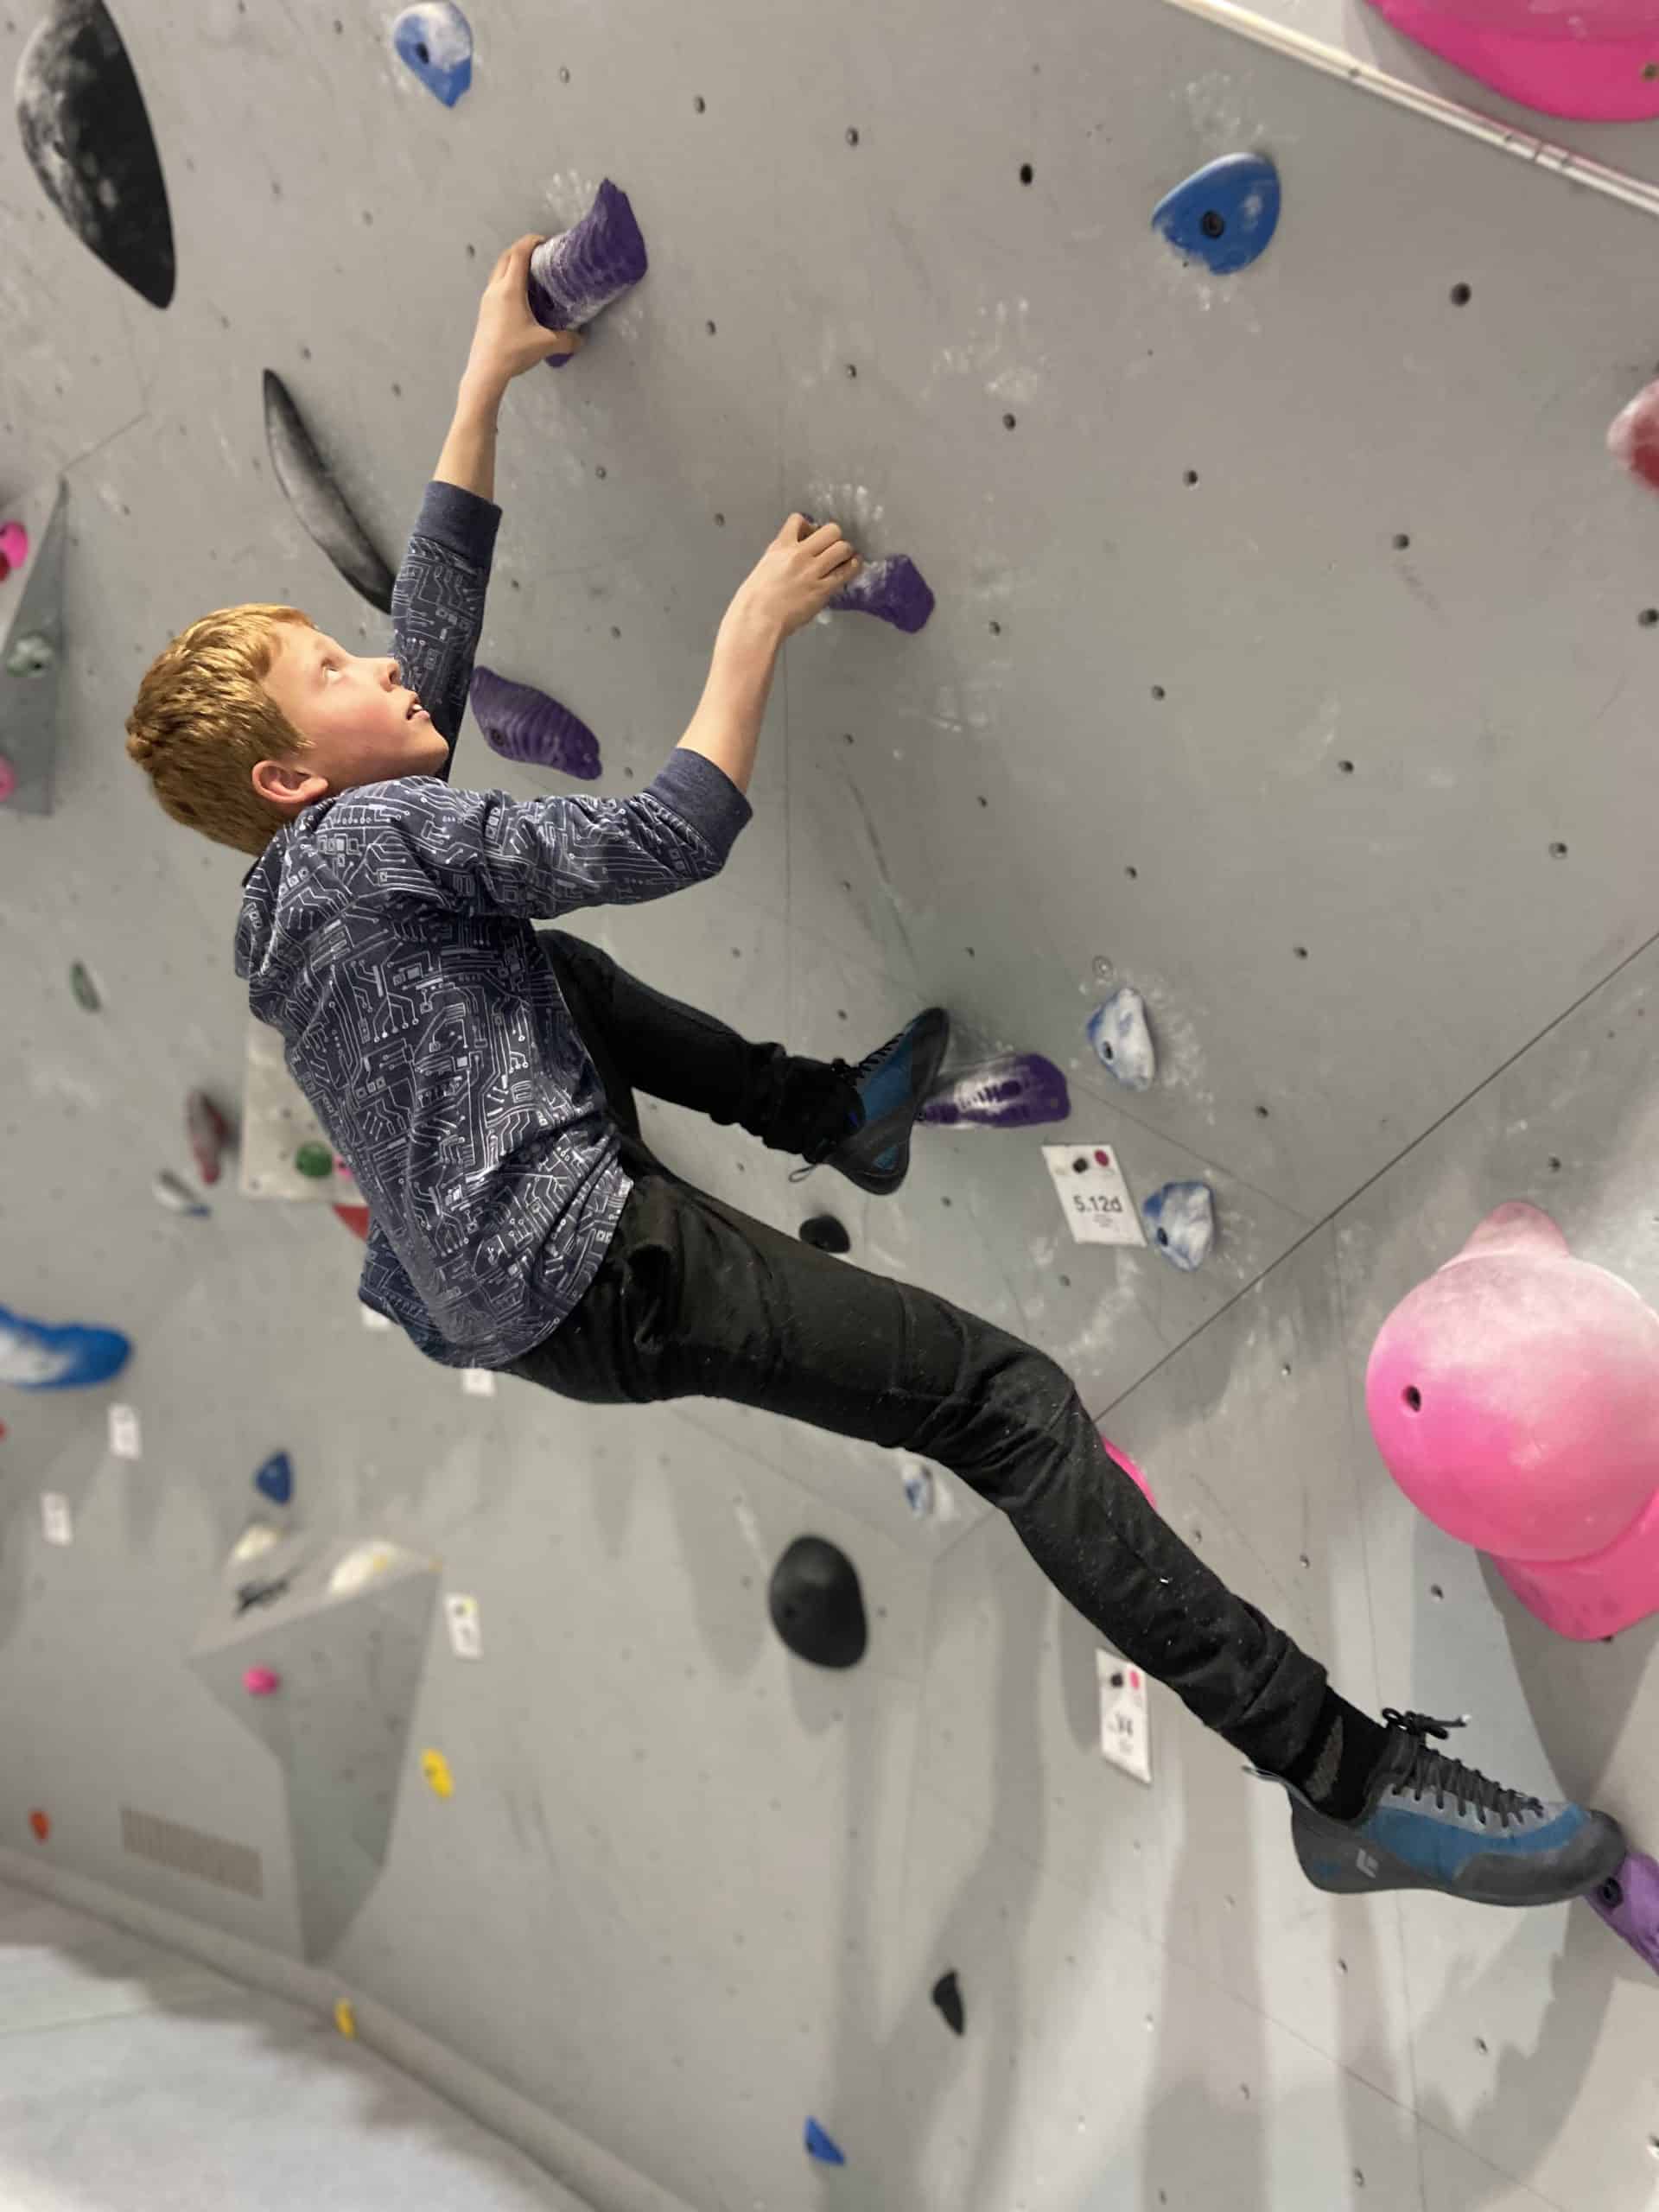 Youth Climbing Injuries (and Prevention)